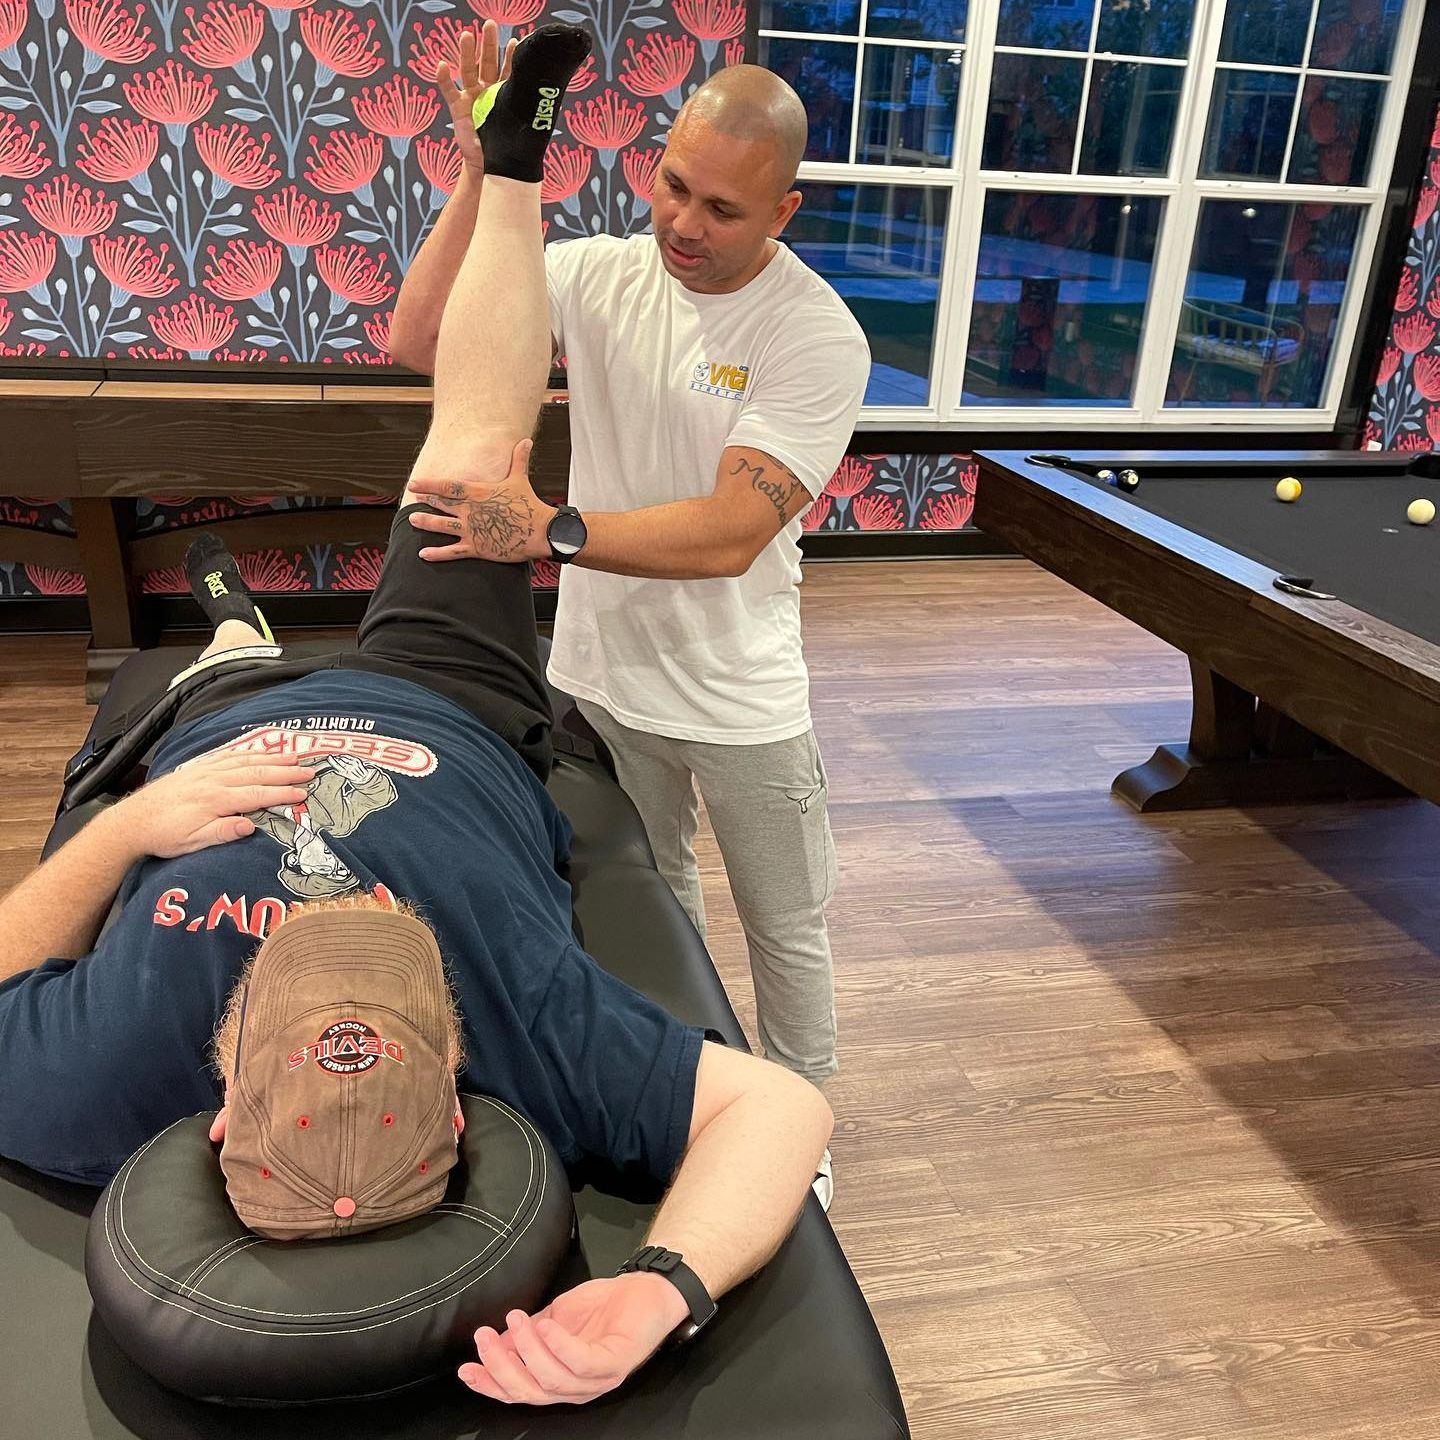 A man is stretching another man 's leg in a room with a pool table.